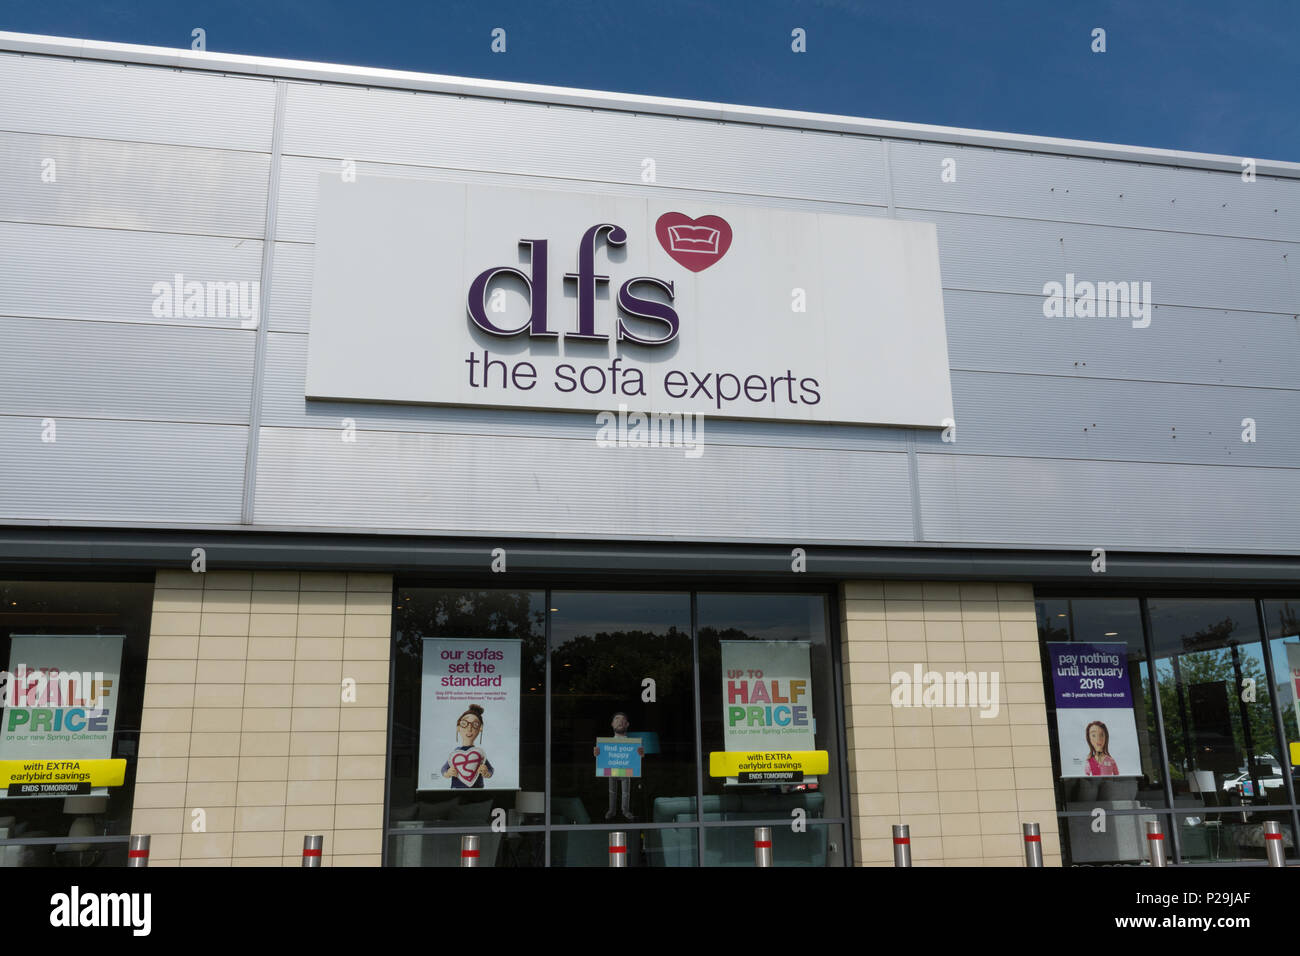 DFS, the sofa experts, exterior of shop with sign, UK Stock Photo